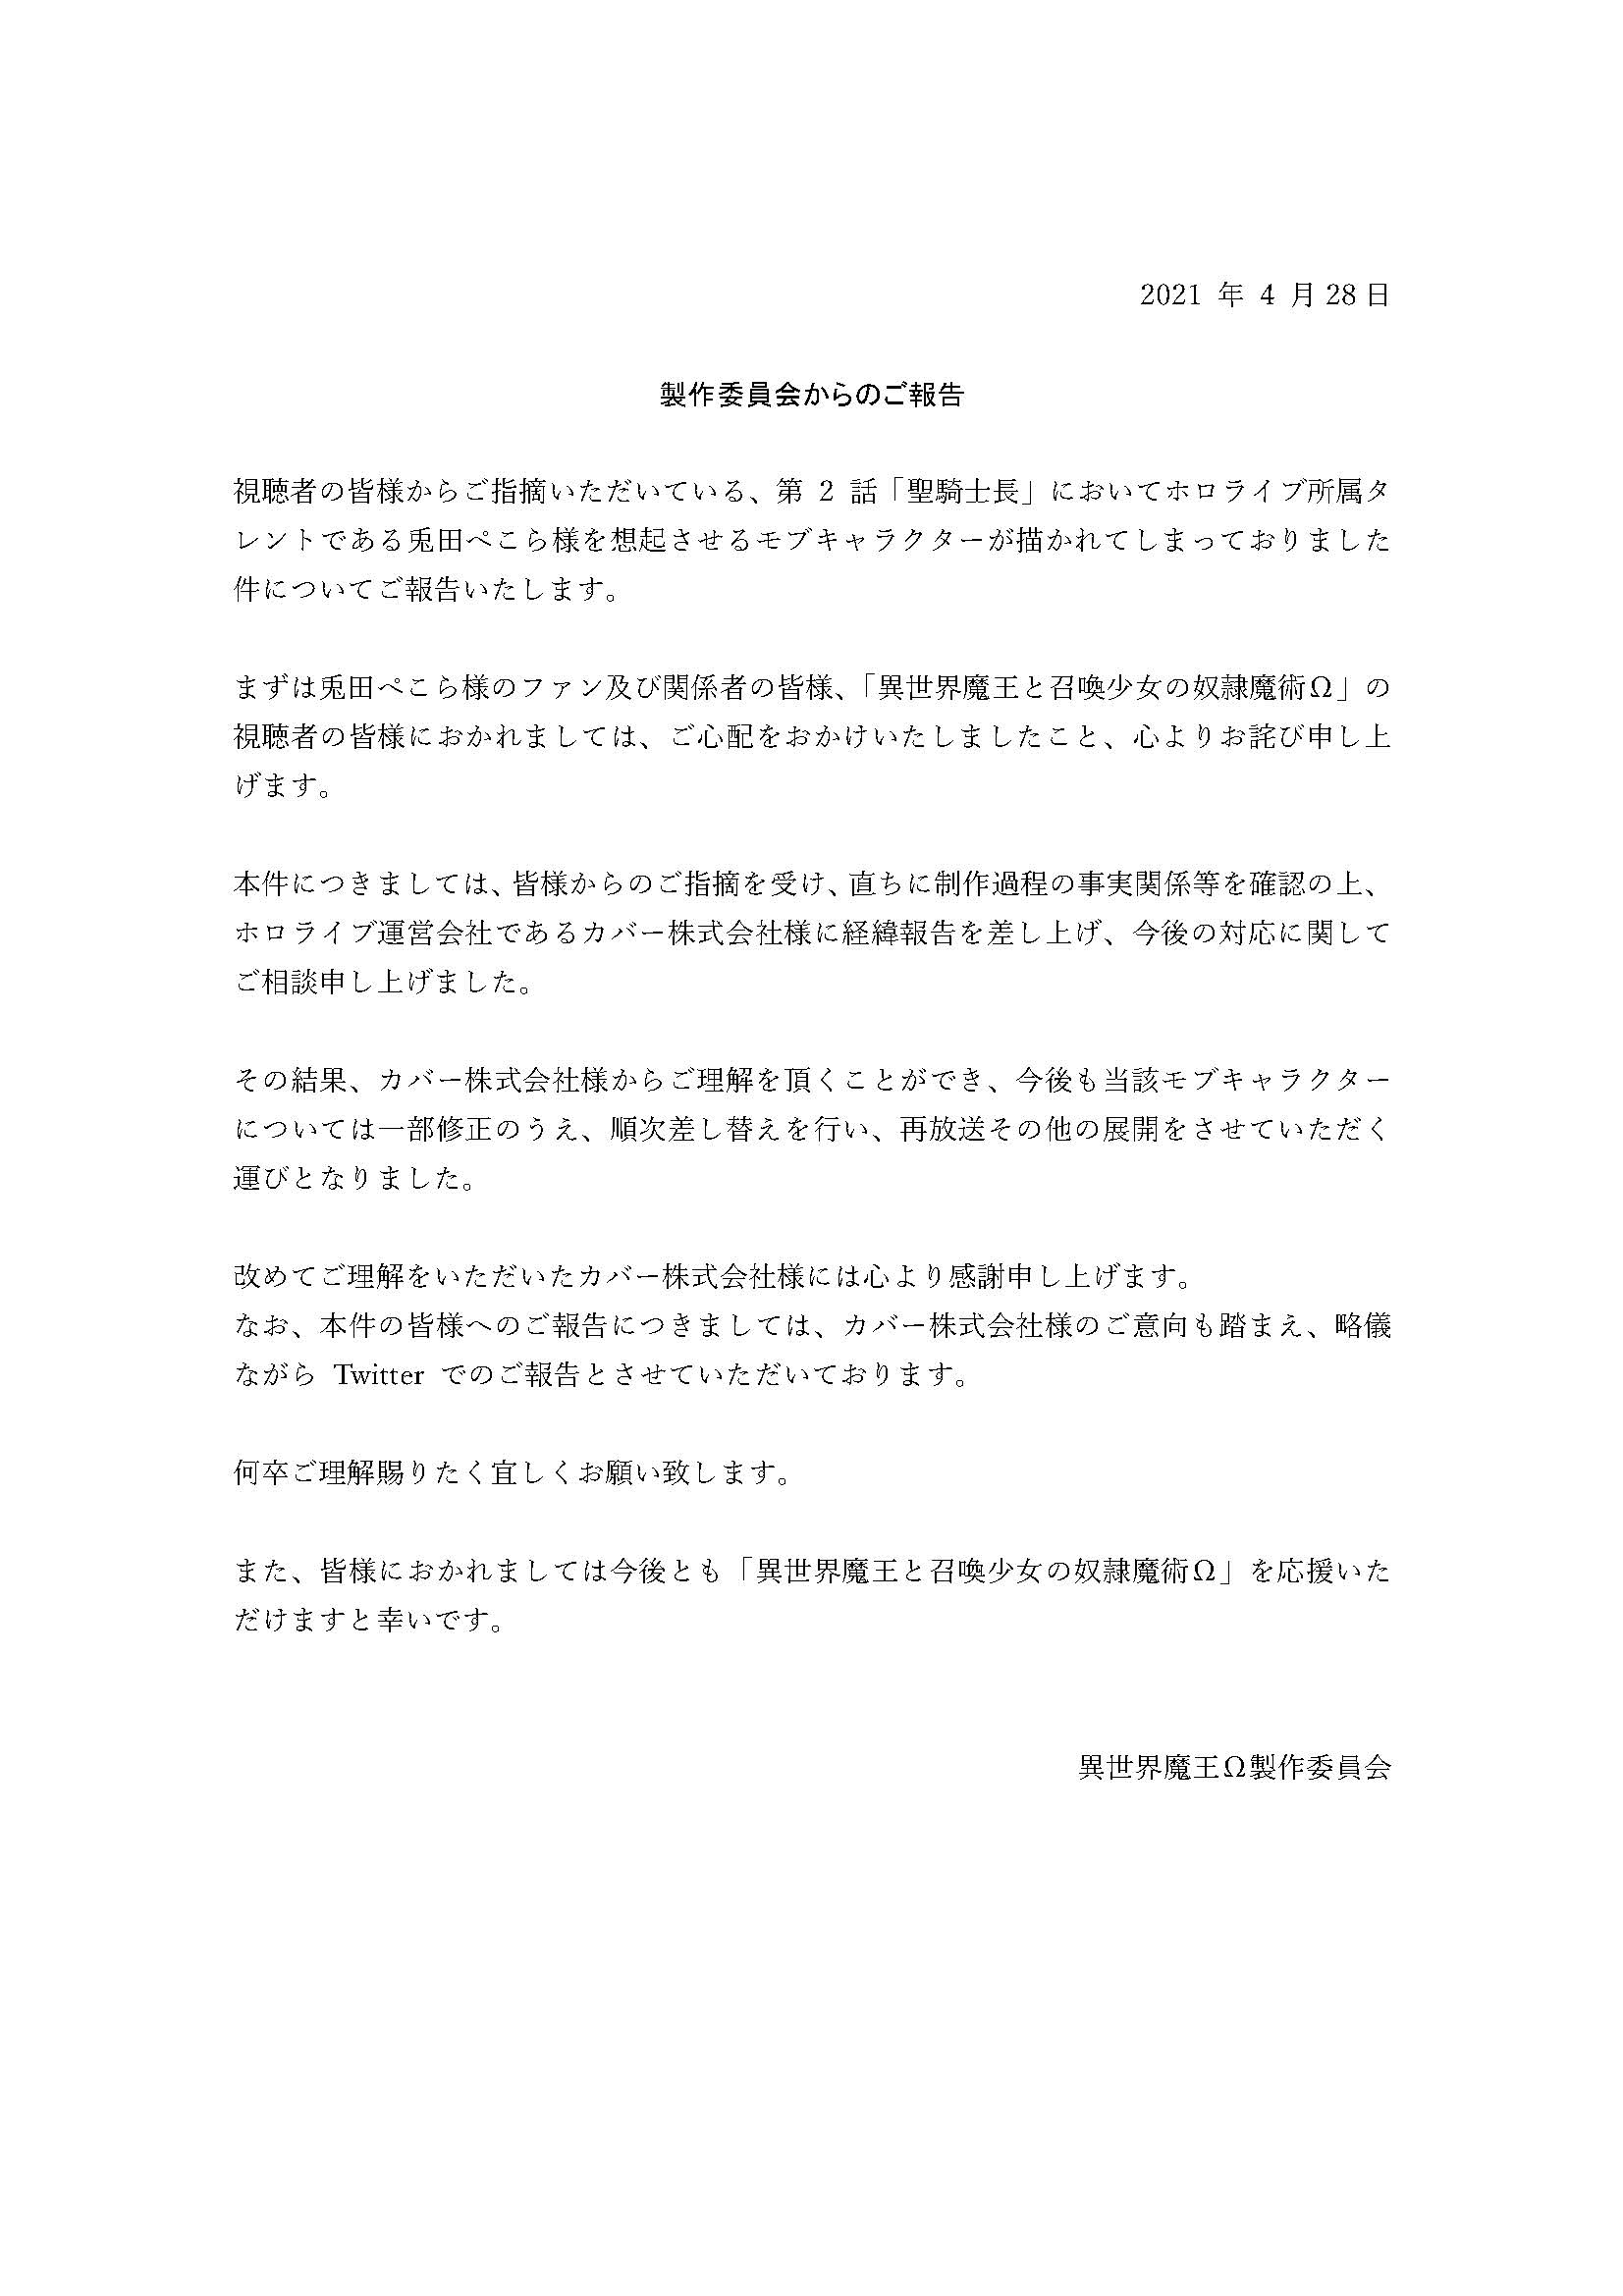 Announcement of the removal of Usada Pekora's cameo in BD